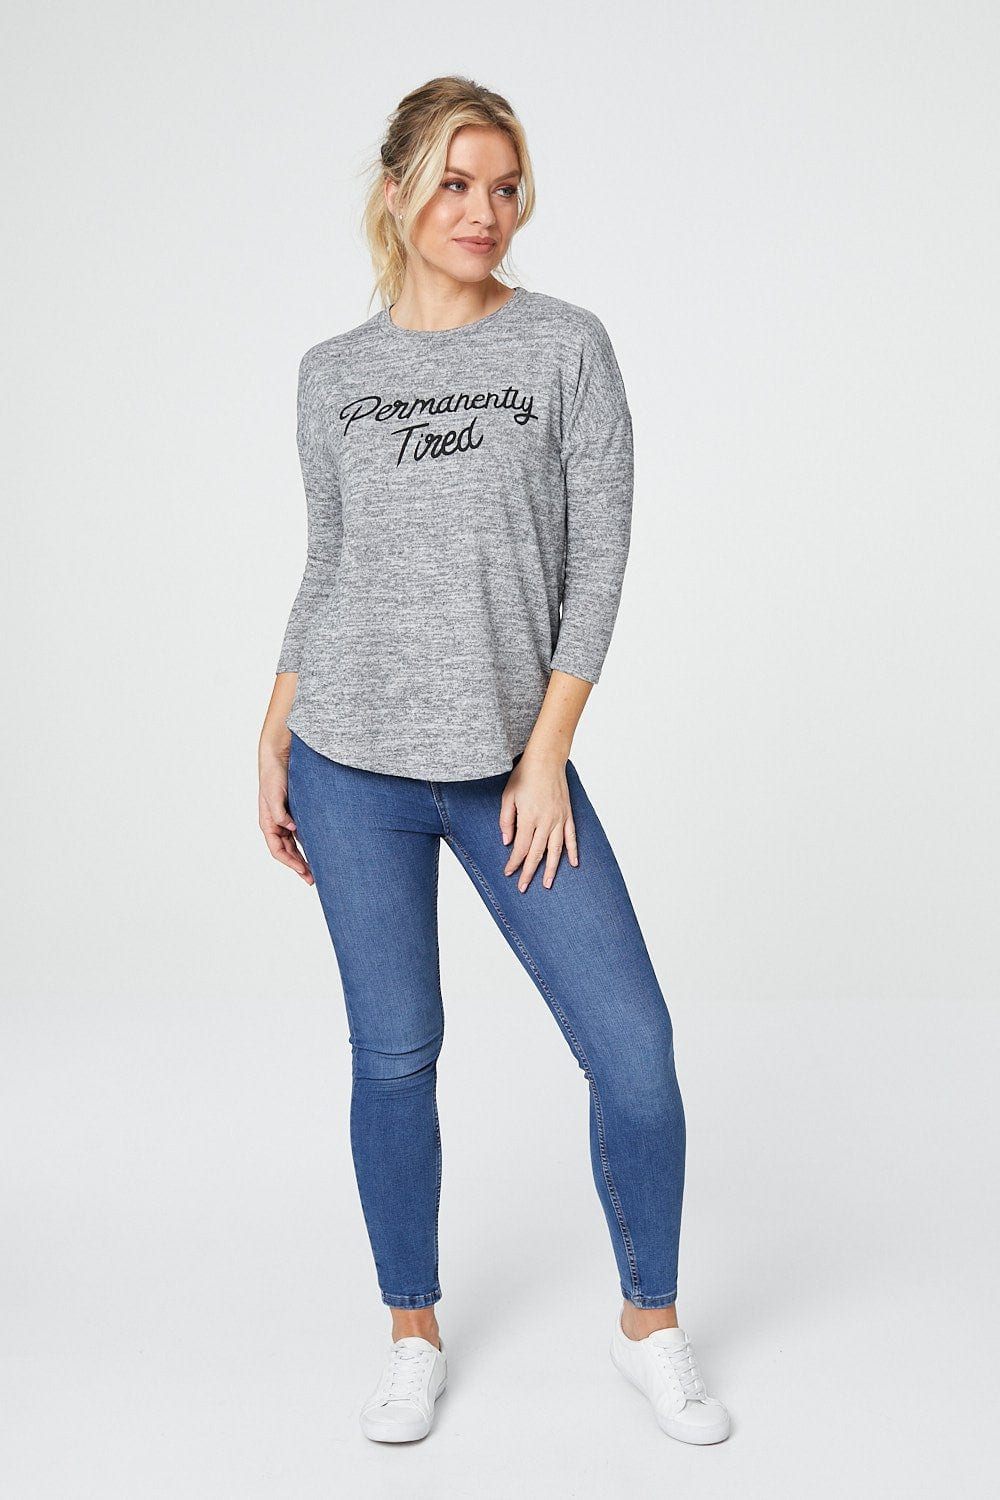 Grey | Logo Print 'Permanently Tiered' Top